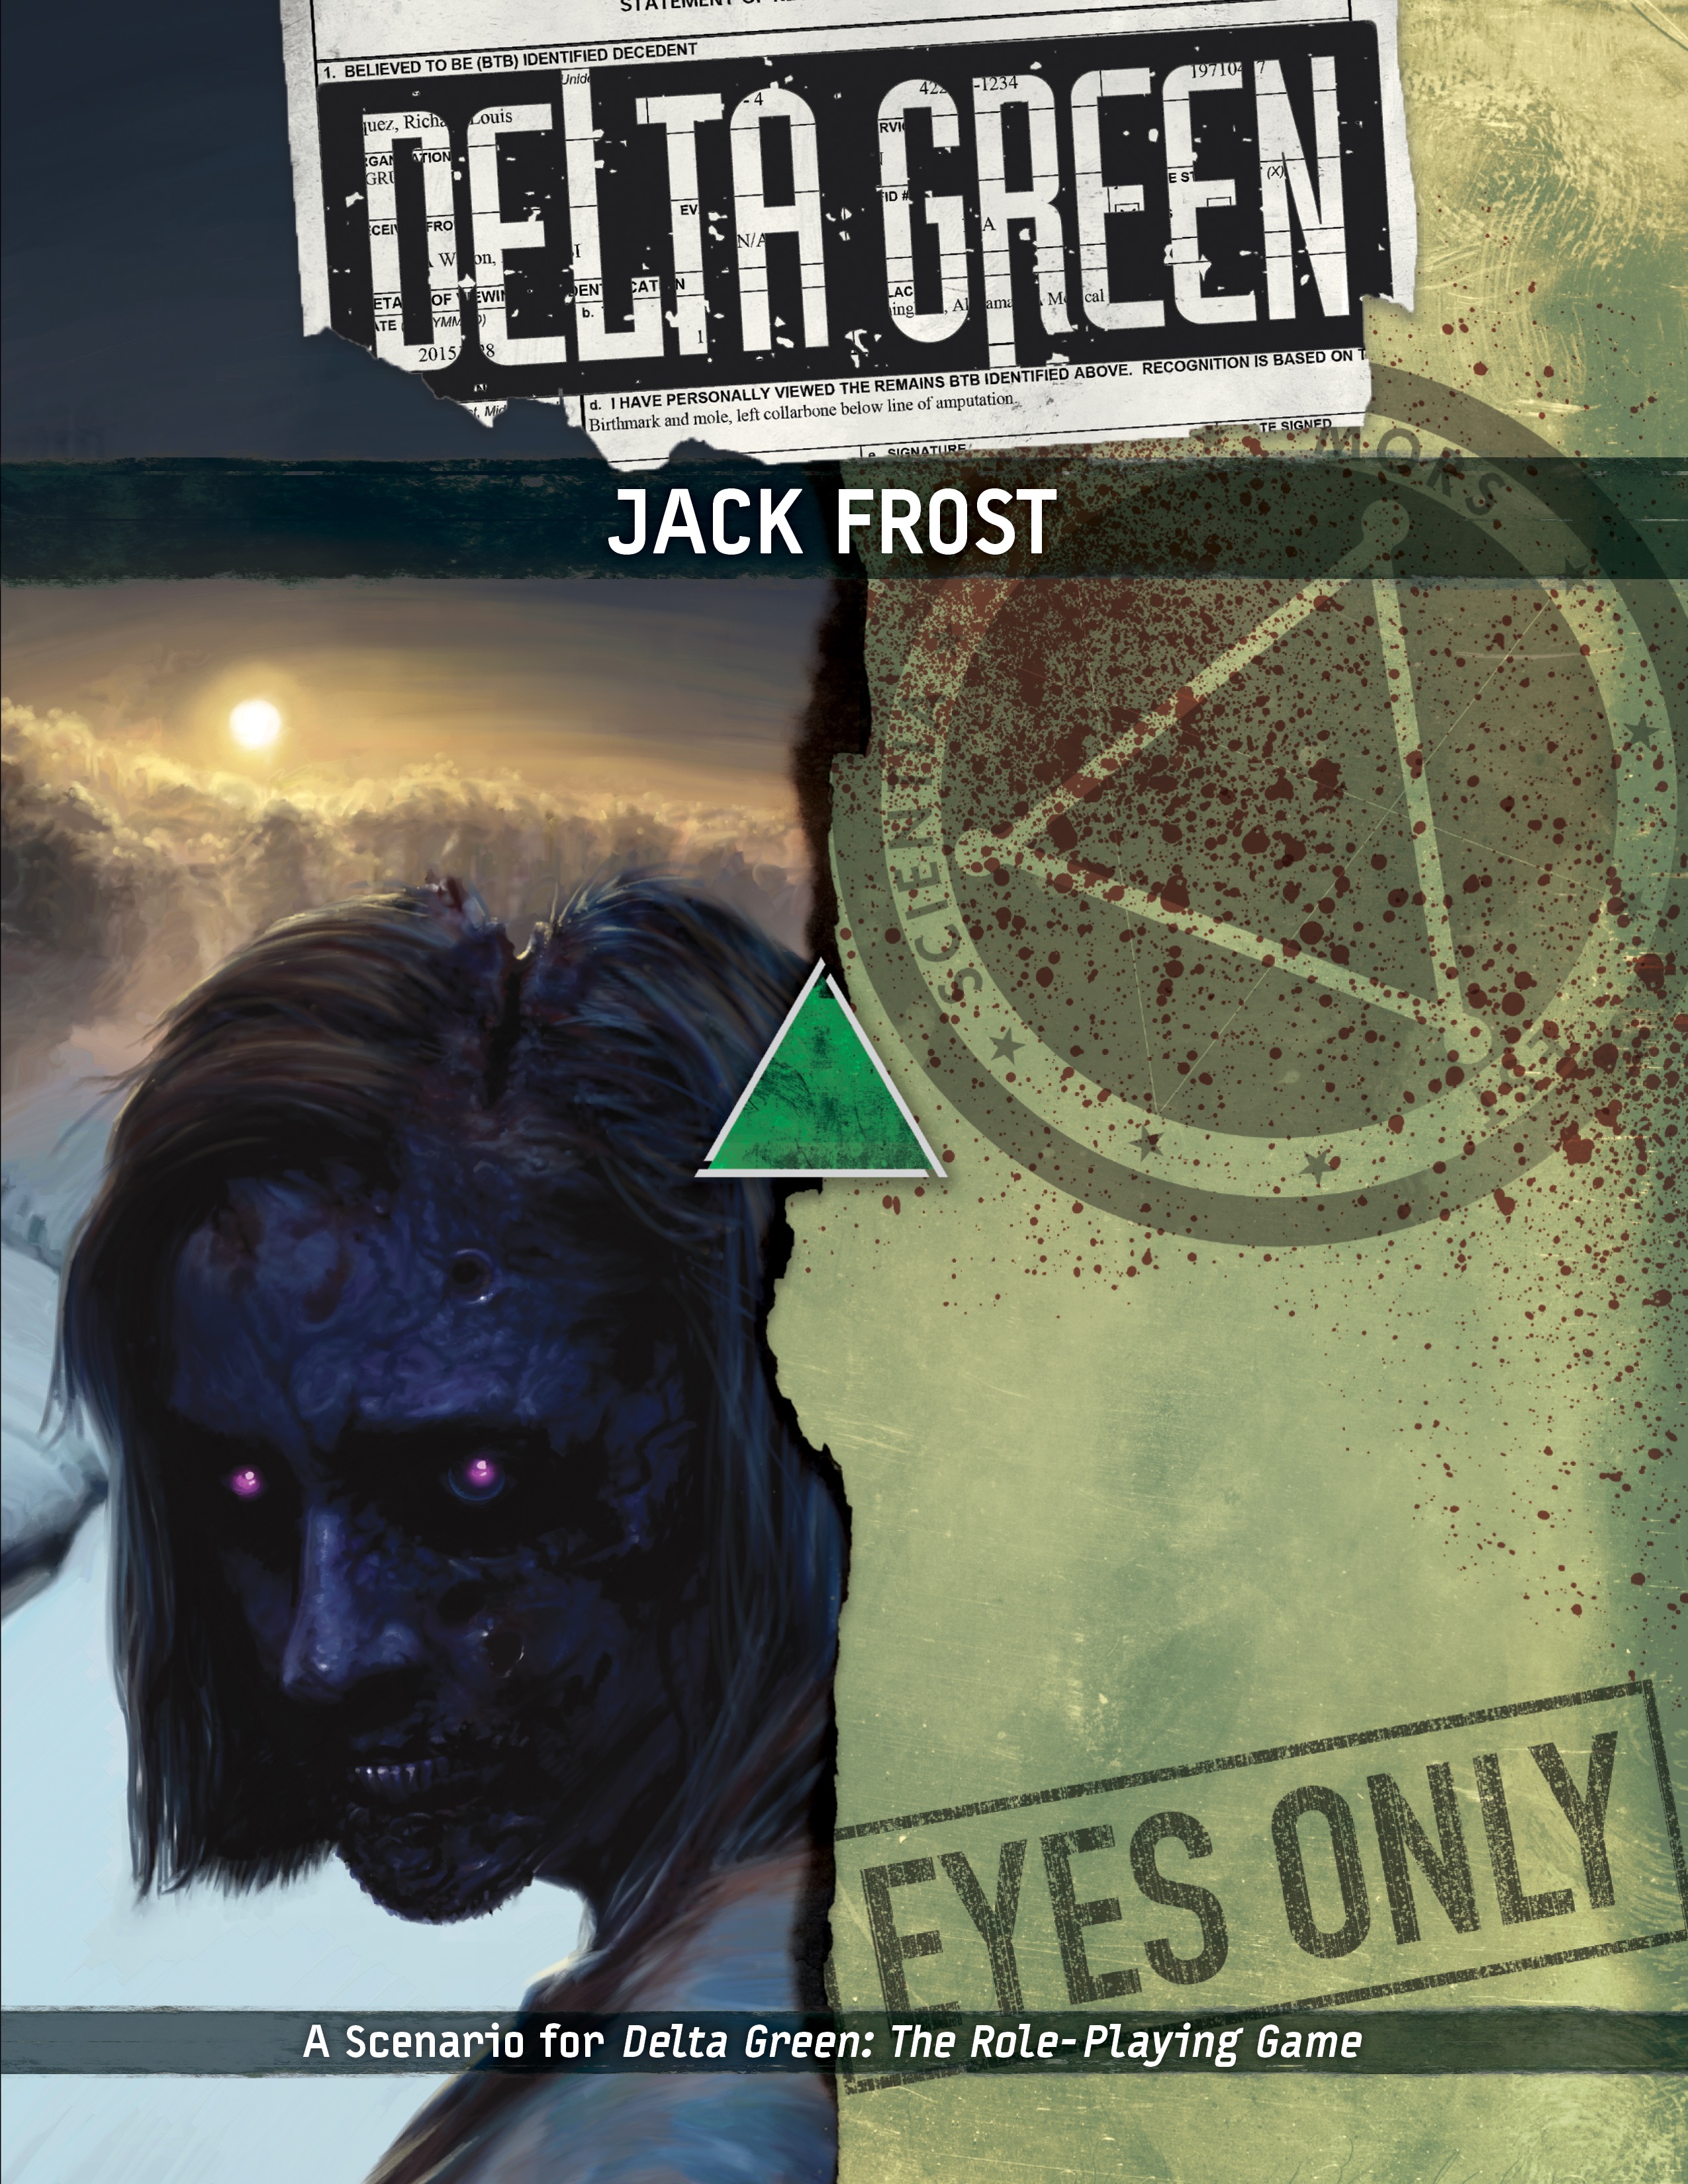 In "Jack Frost" playtesting, a doe awakened from death to hunt and devour one of the world's most highly trained pararescuemen.